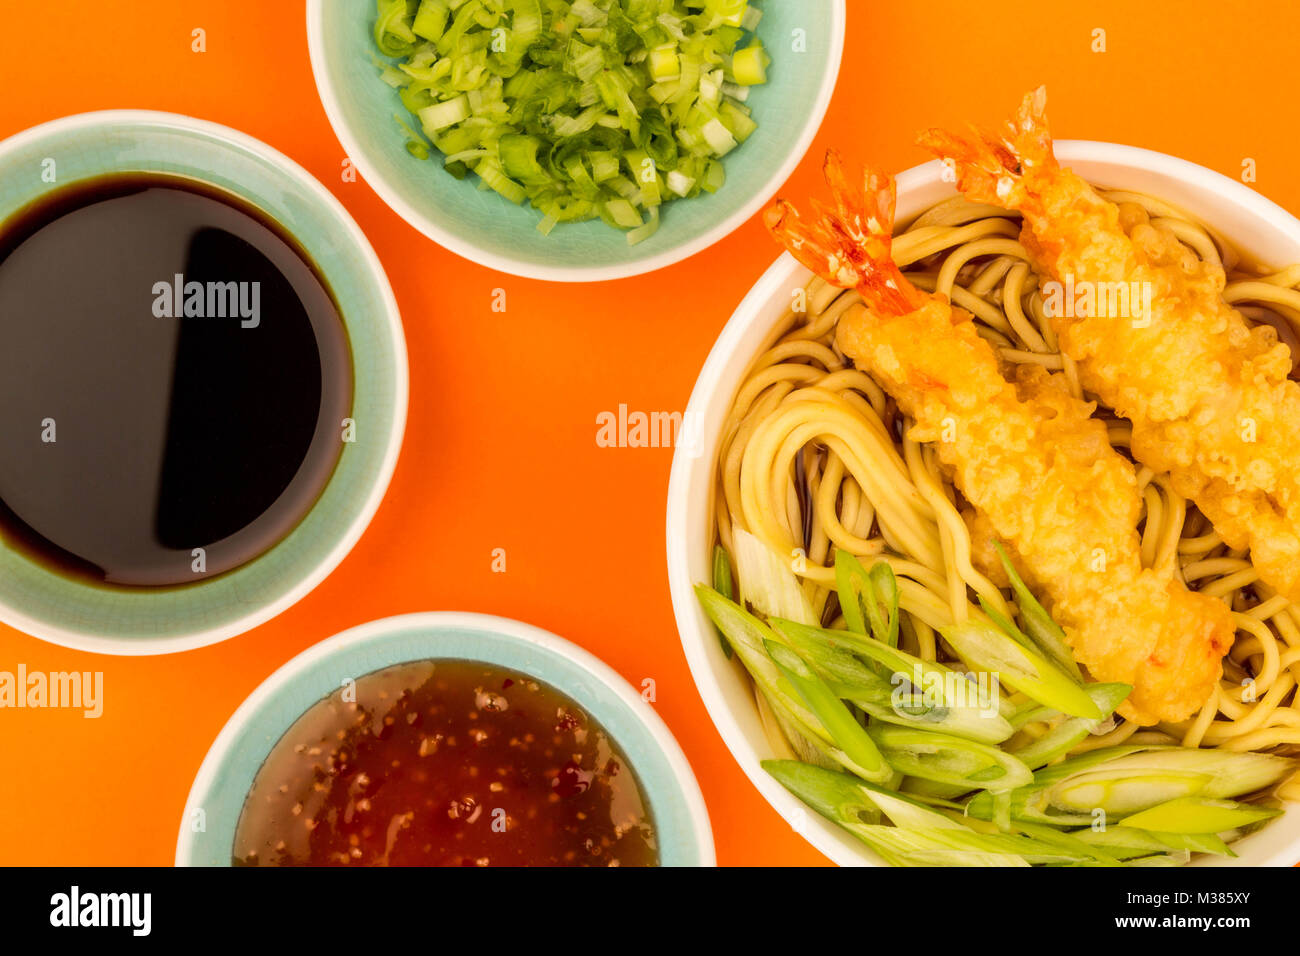 Japanese Style Tiger Prawn Tempura Noodle Soup With Spring Onions Against An Orange Background Stock Photo